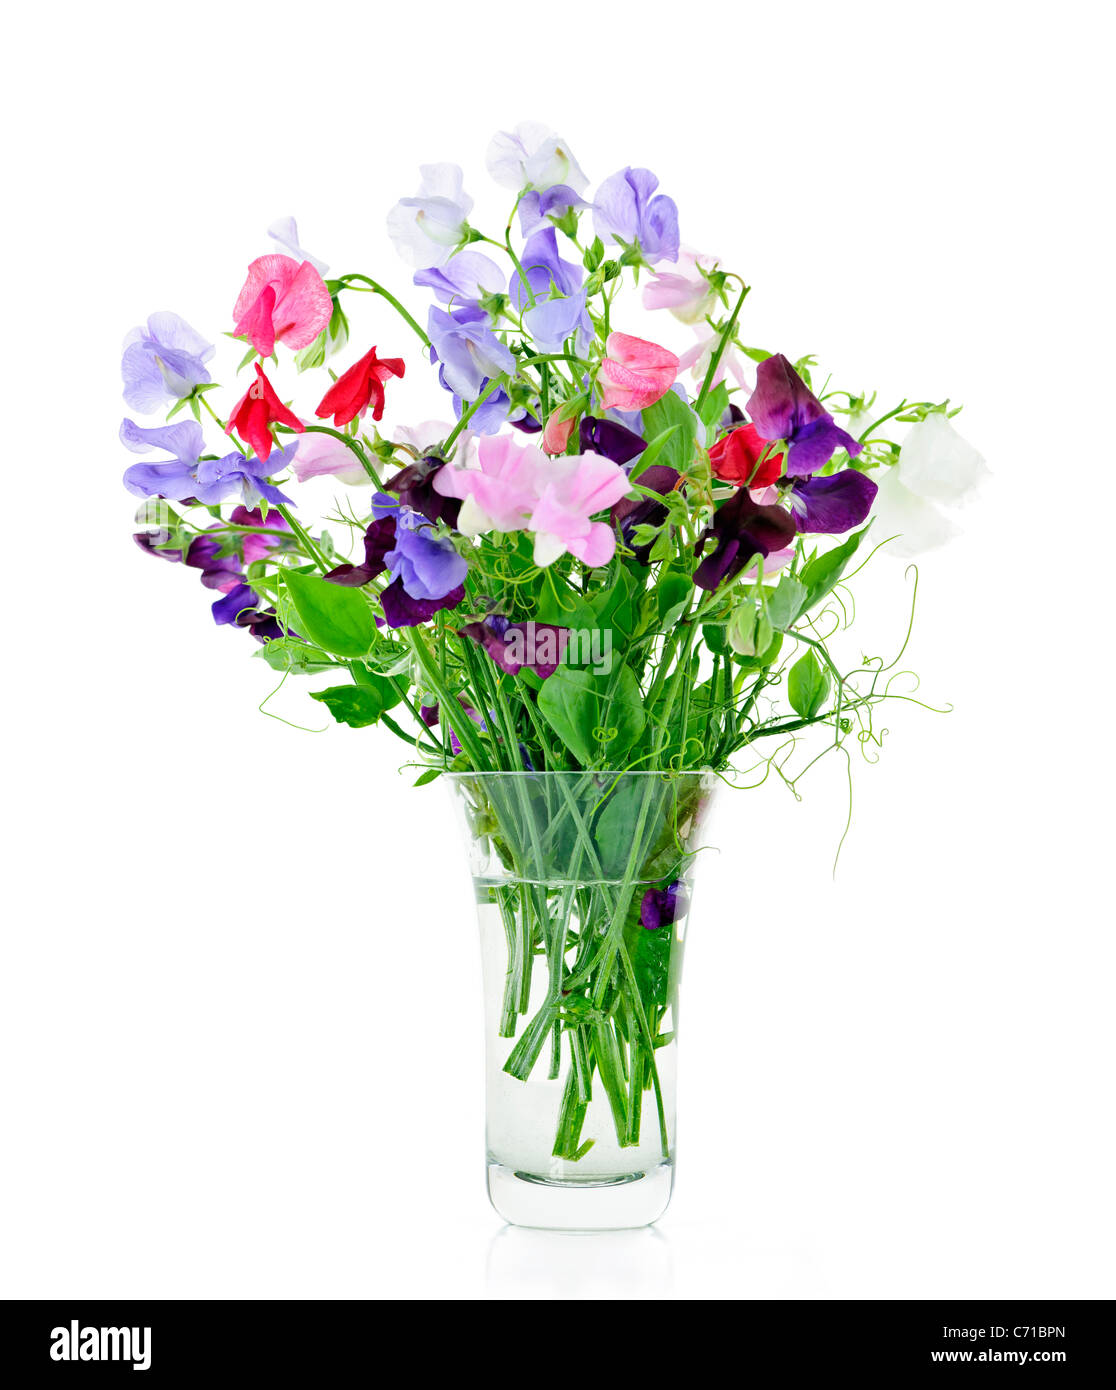 Bouquet of colorful sweet pea flowers in glass vase Stock Photo